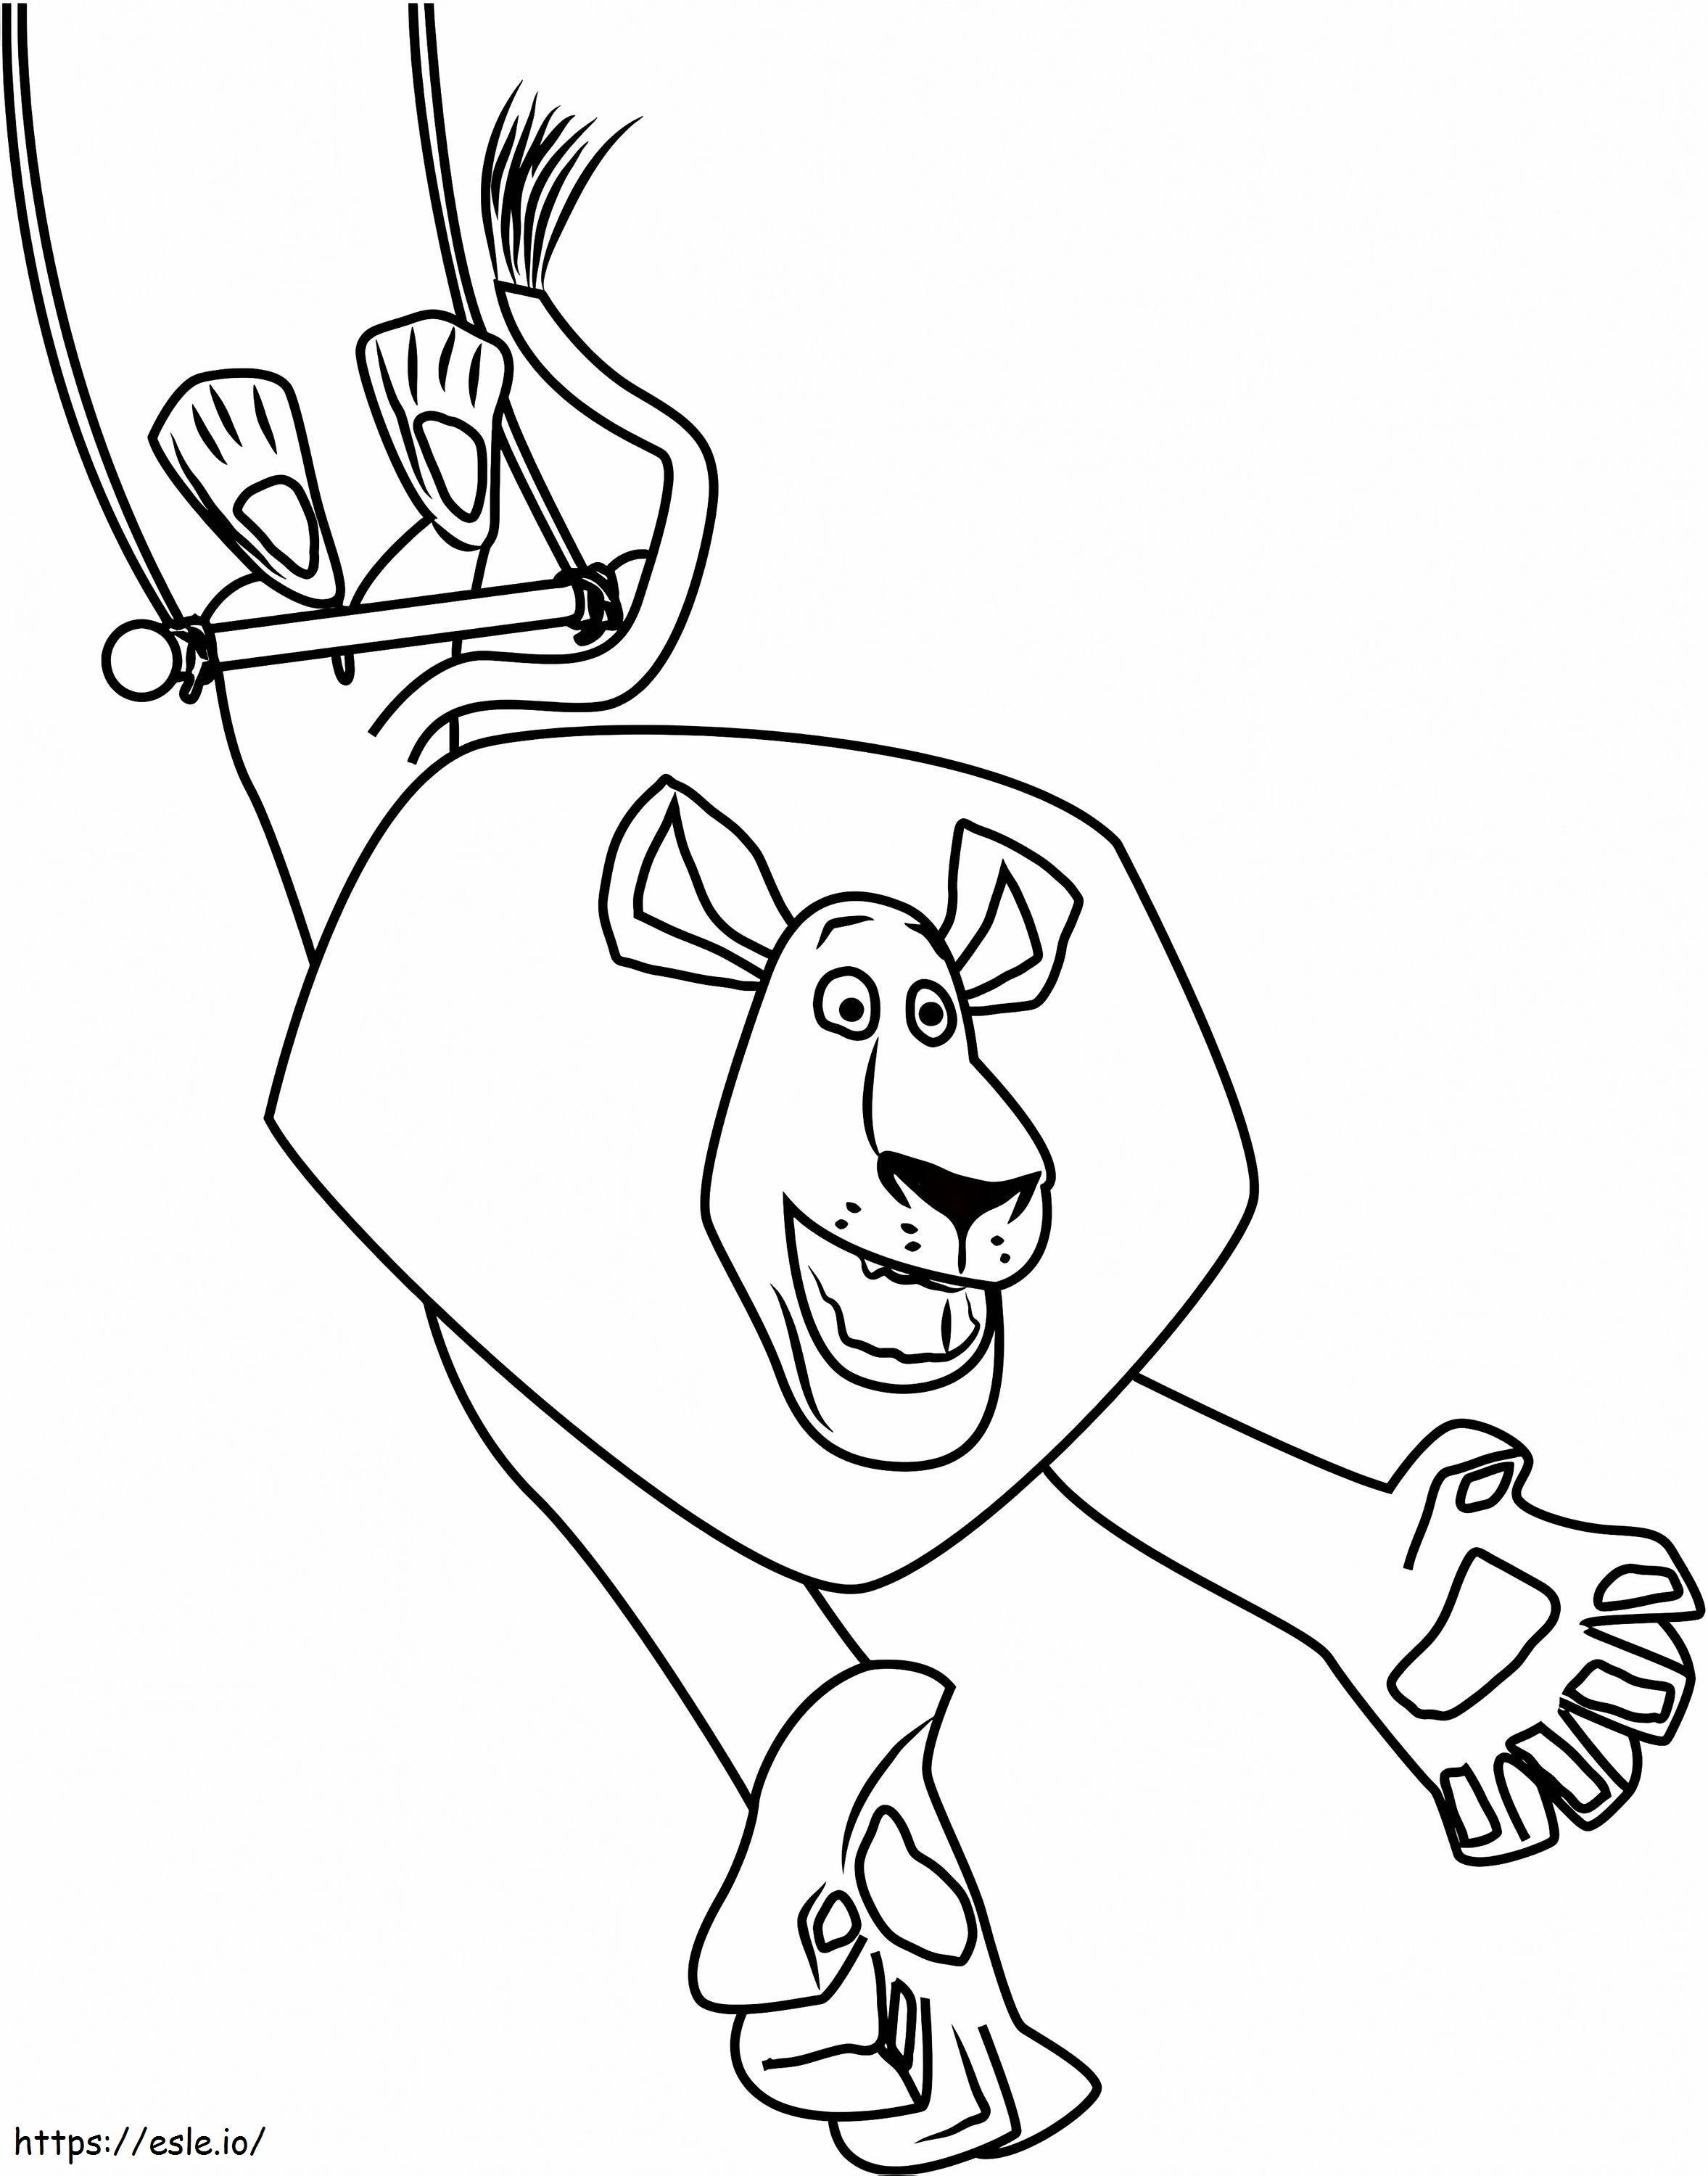 Alex Play With Ropea4 coloring page